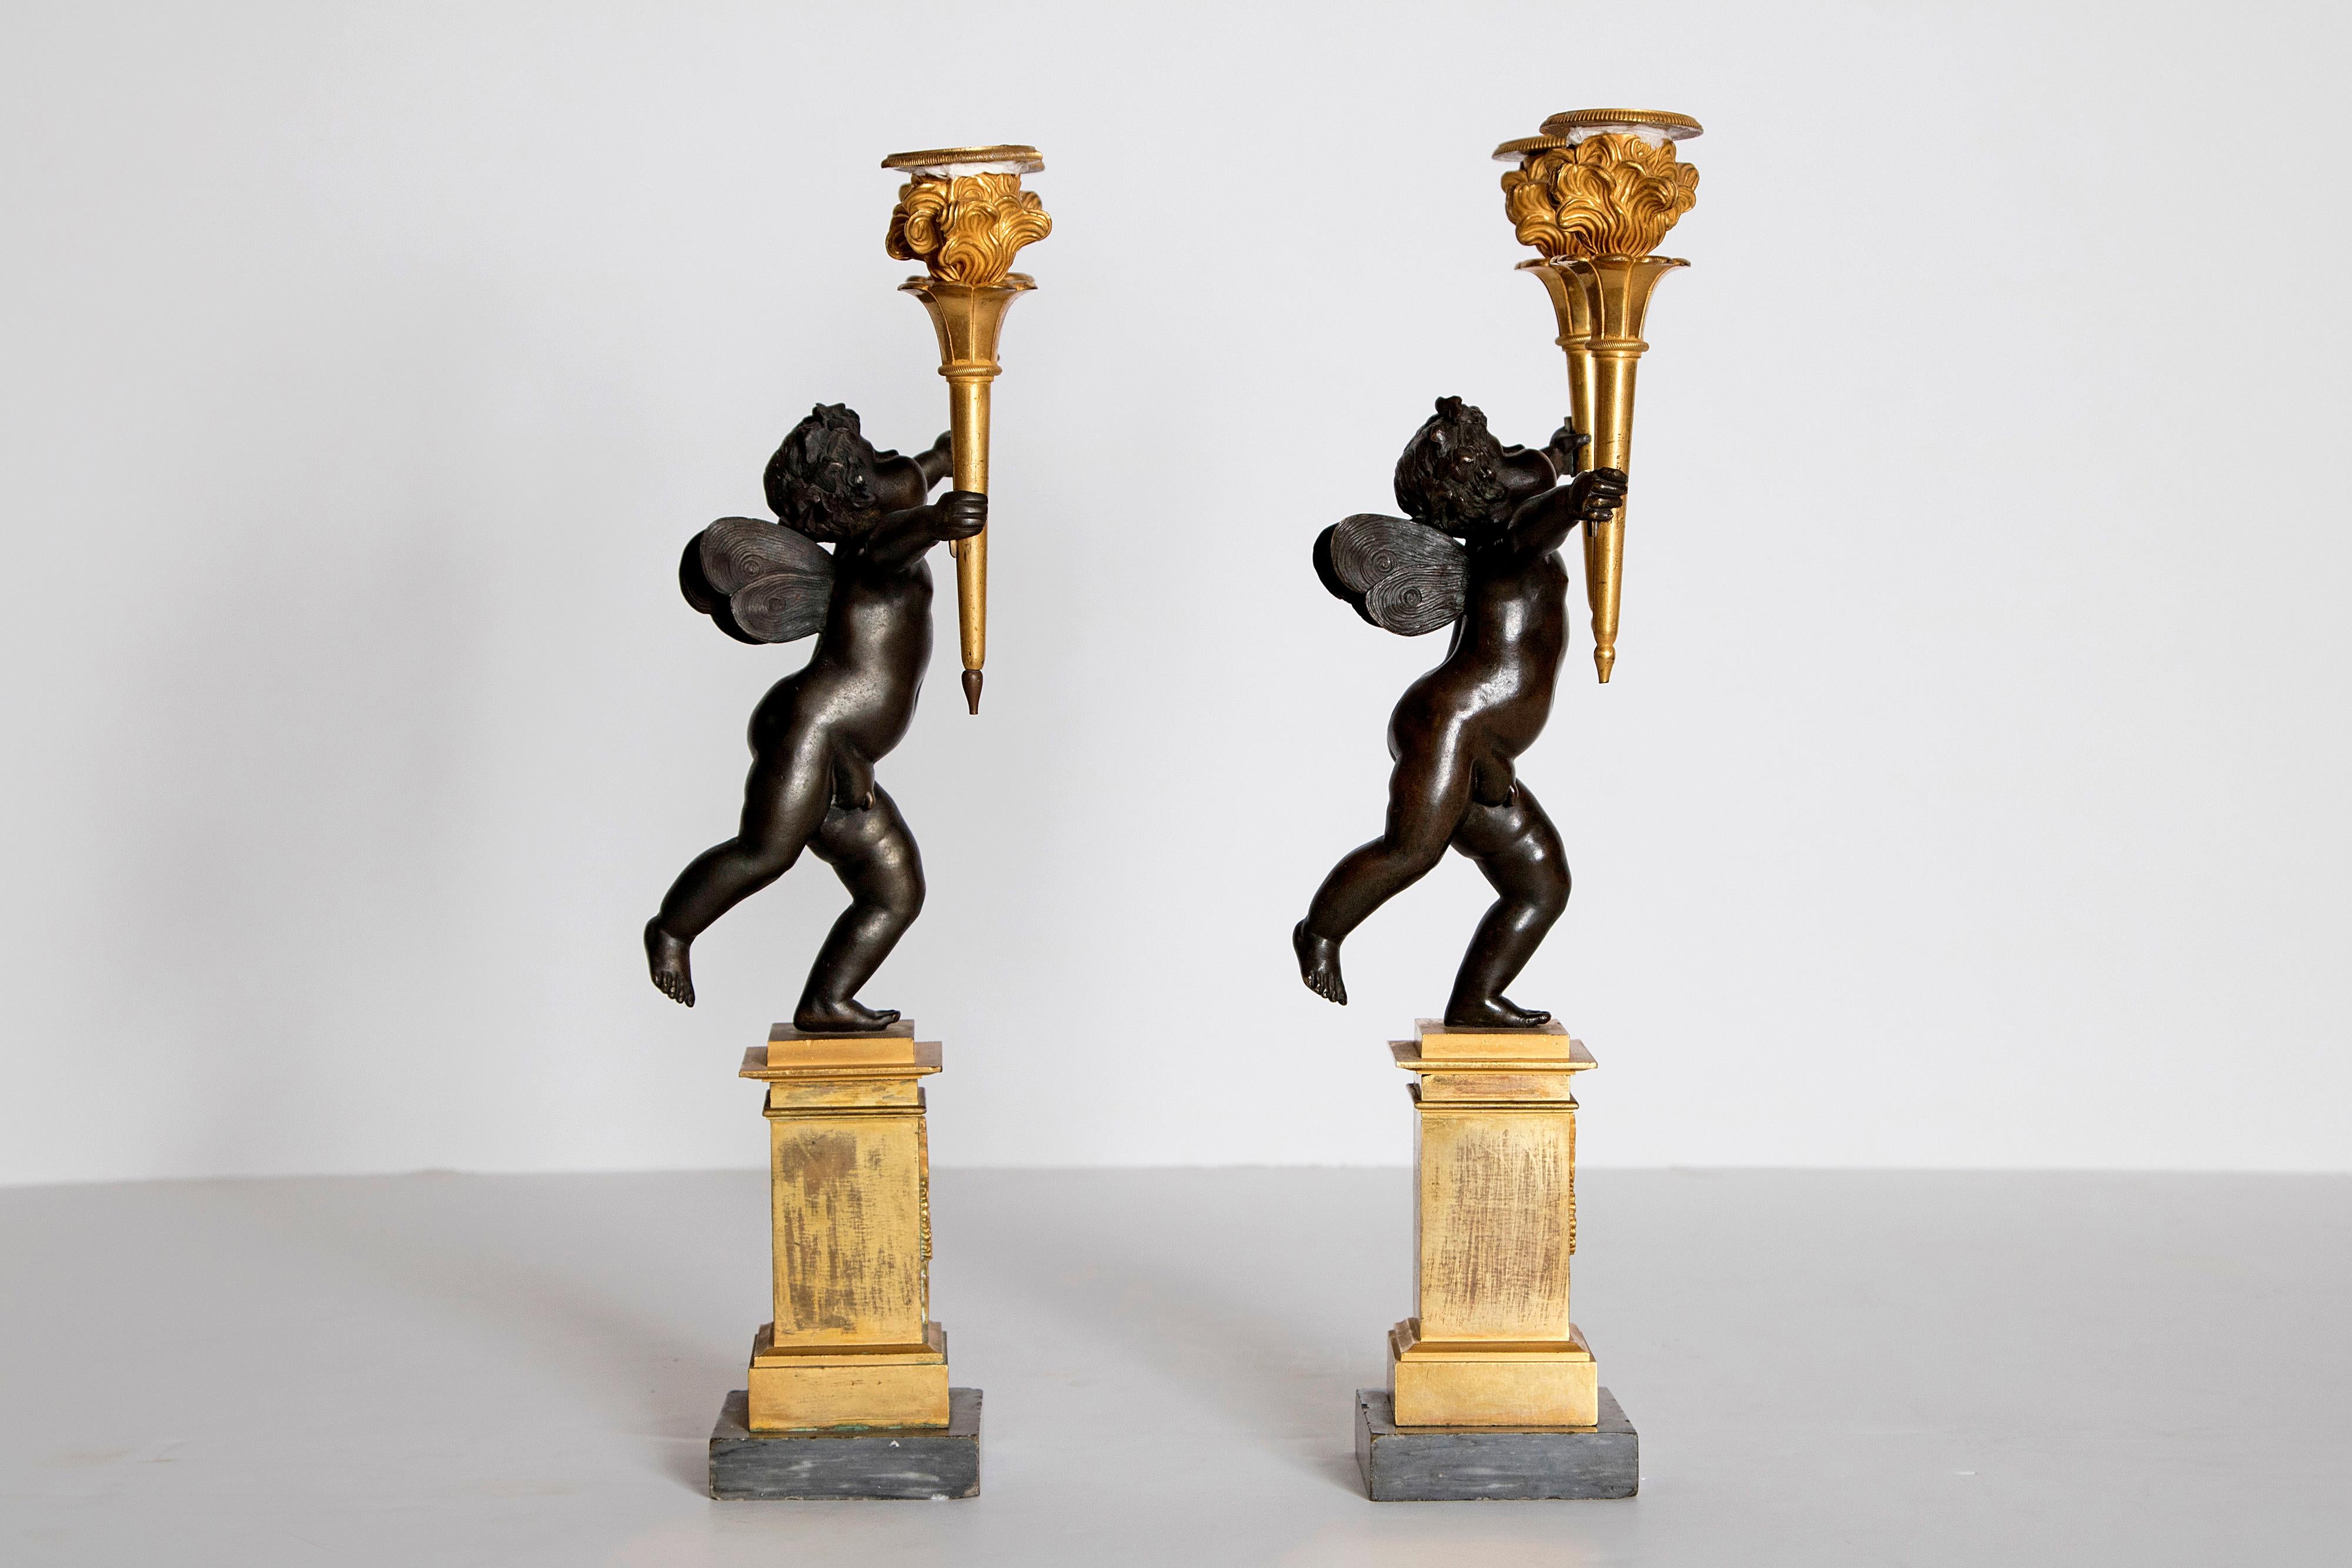 18th Century Pair of French Charles X Patinated Bronze and Gilt Figurative Candelabras For Sale